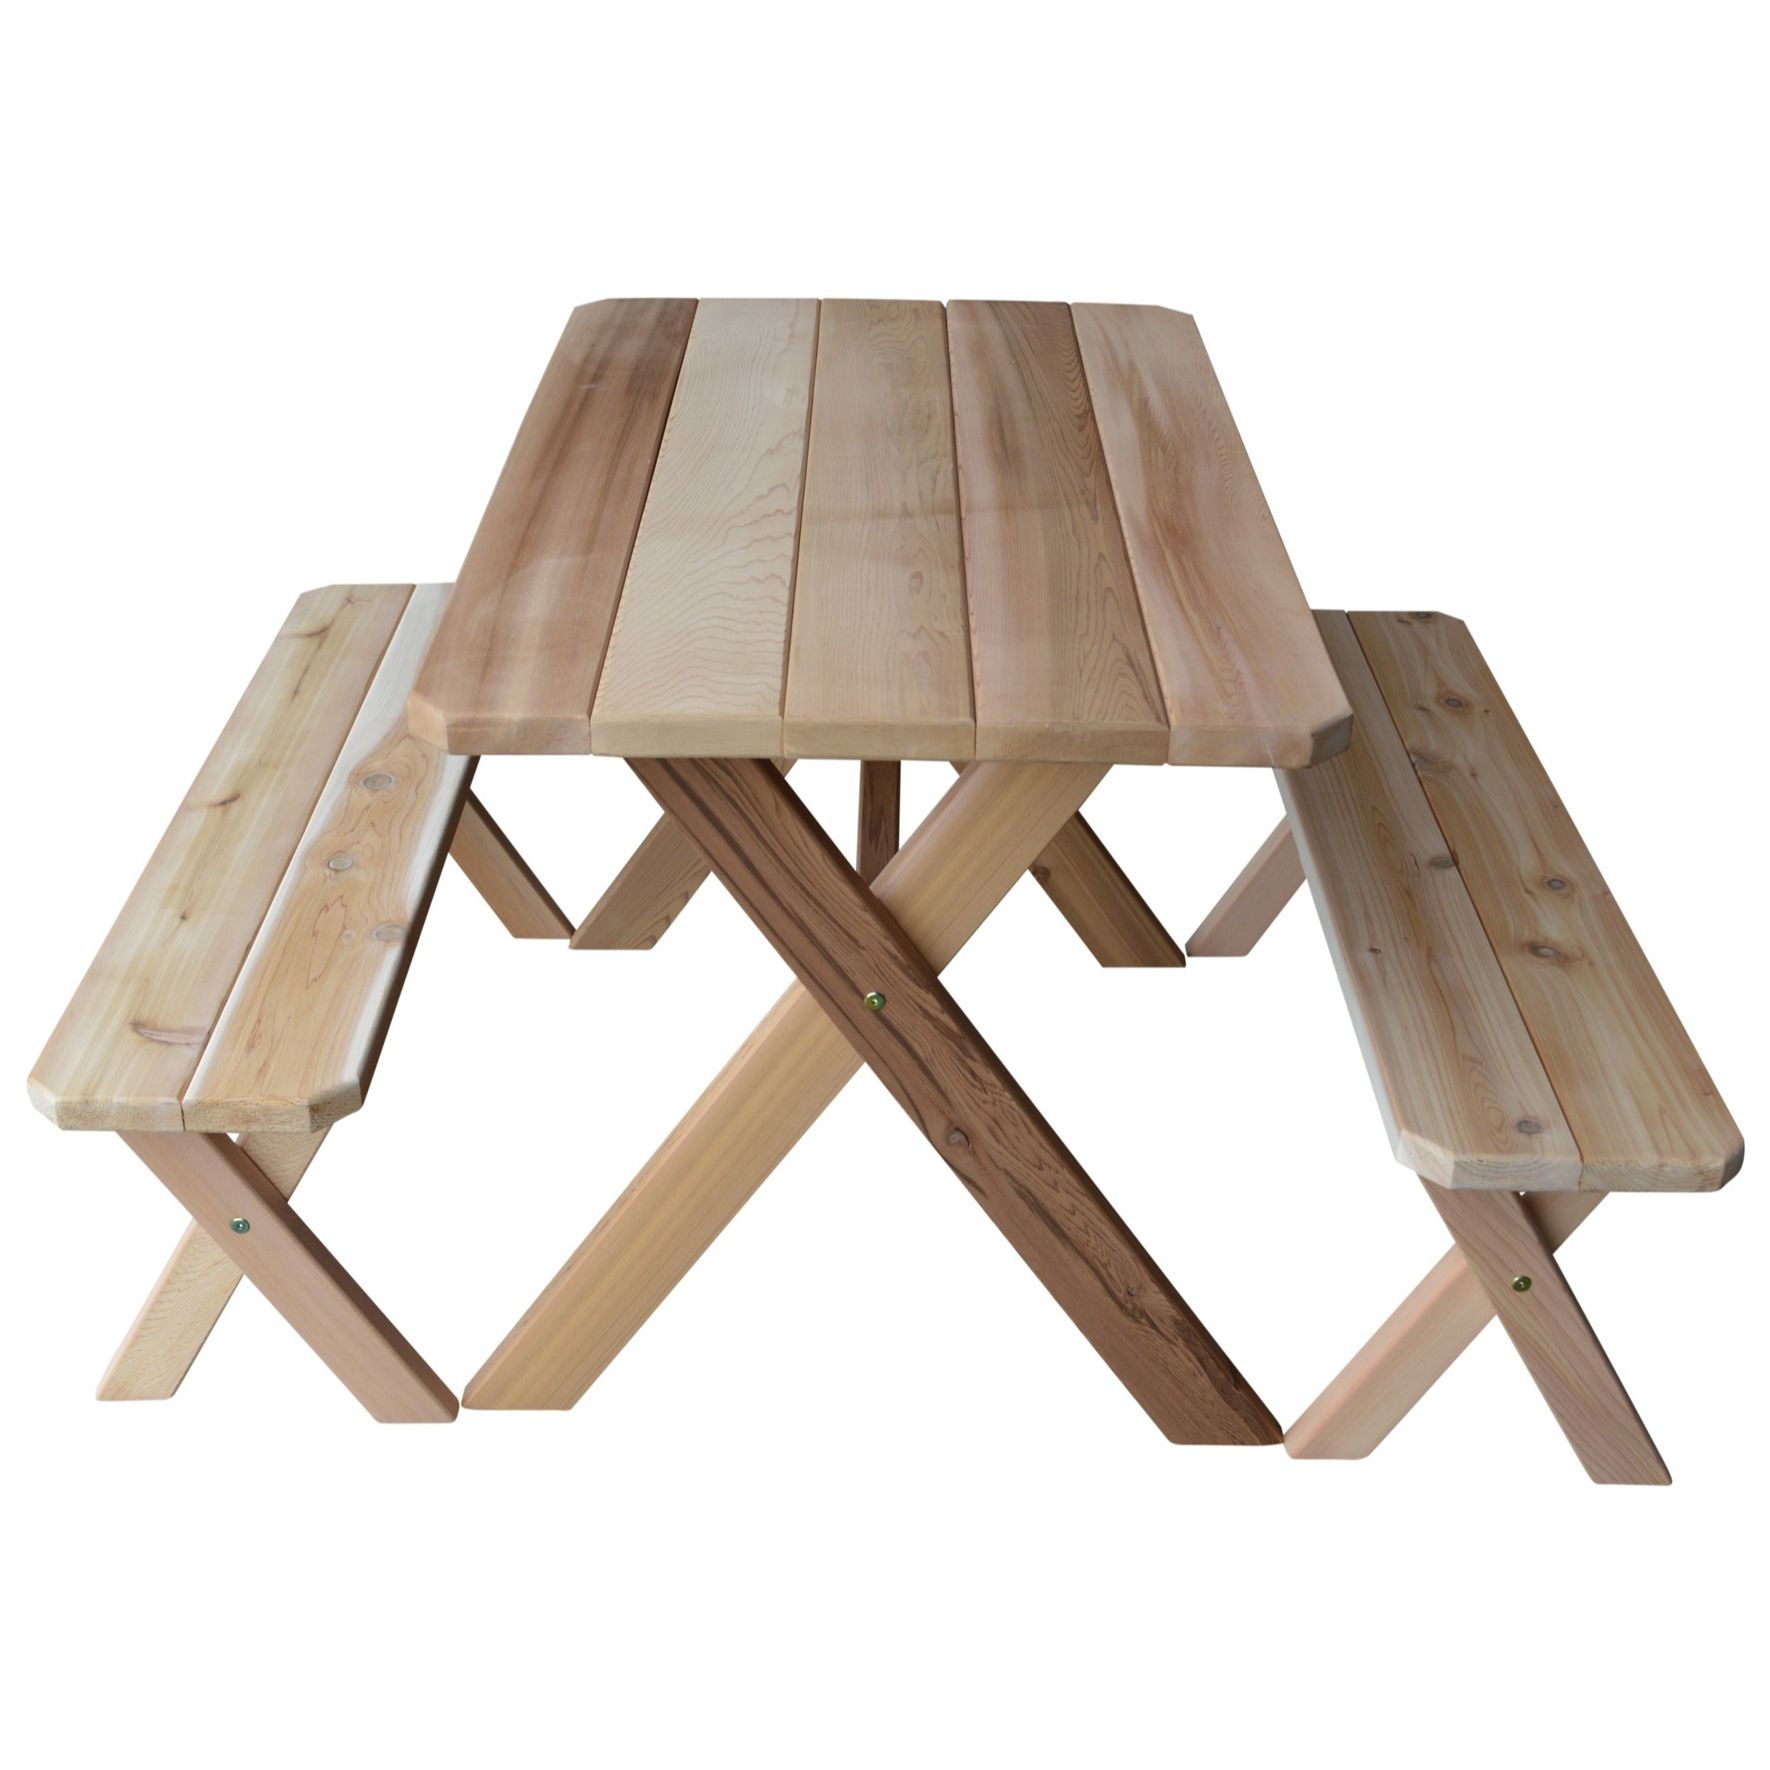 A&L Furniture Cedar Cross-leg Picnic Table with Benches-Multiple Sizes